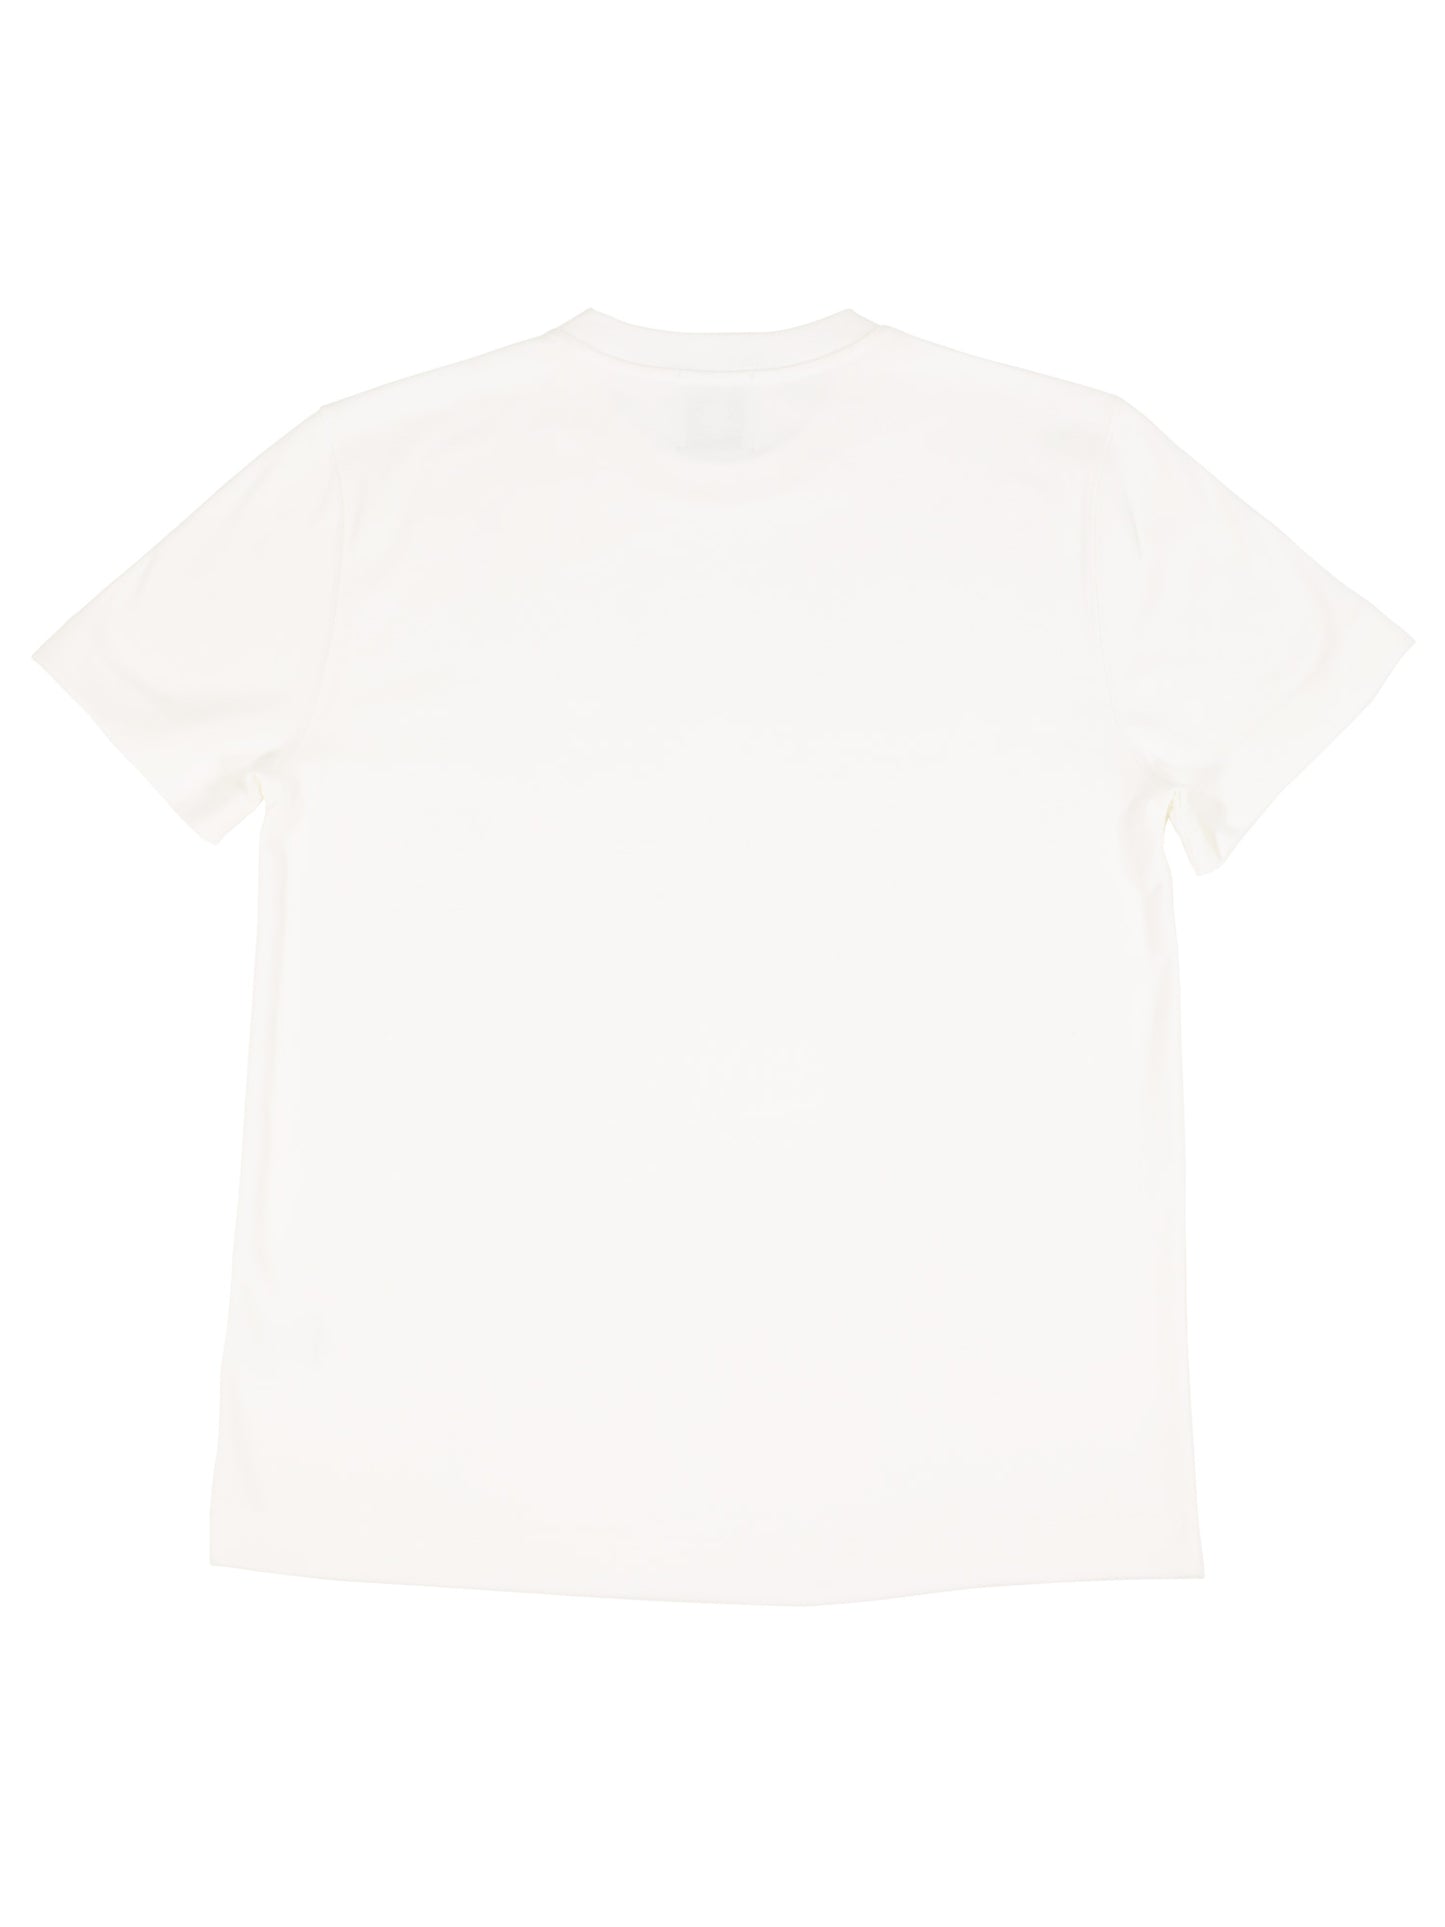 Regular fitted Basic Tee shirts